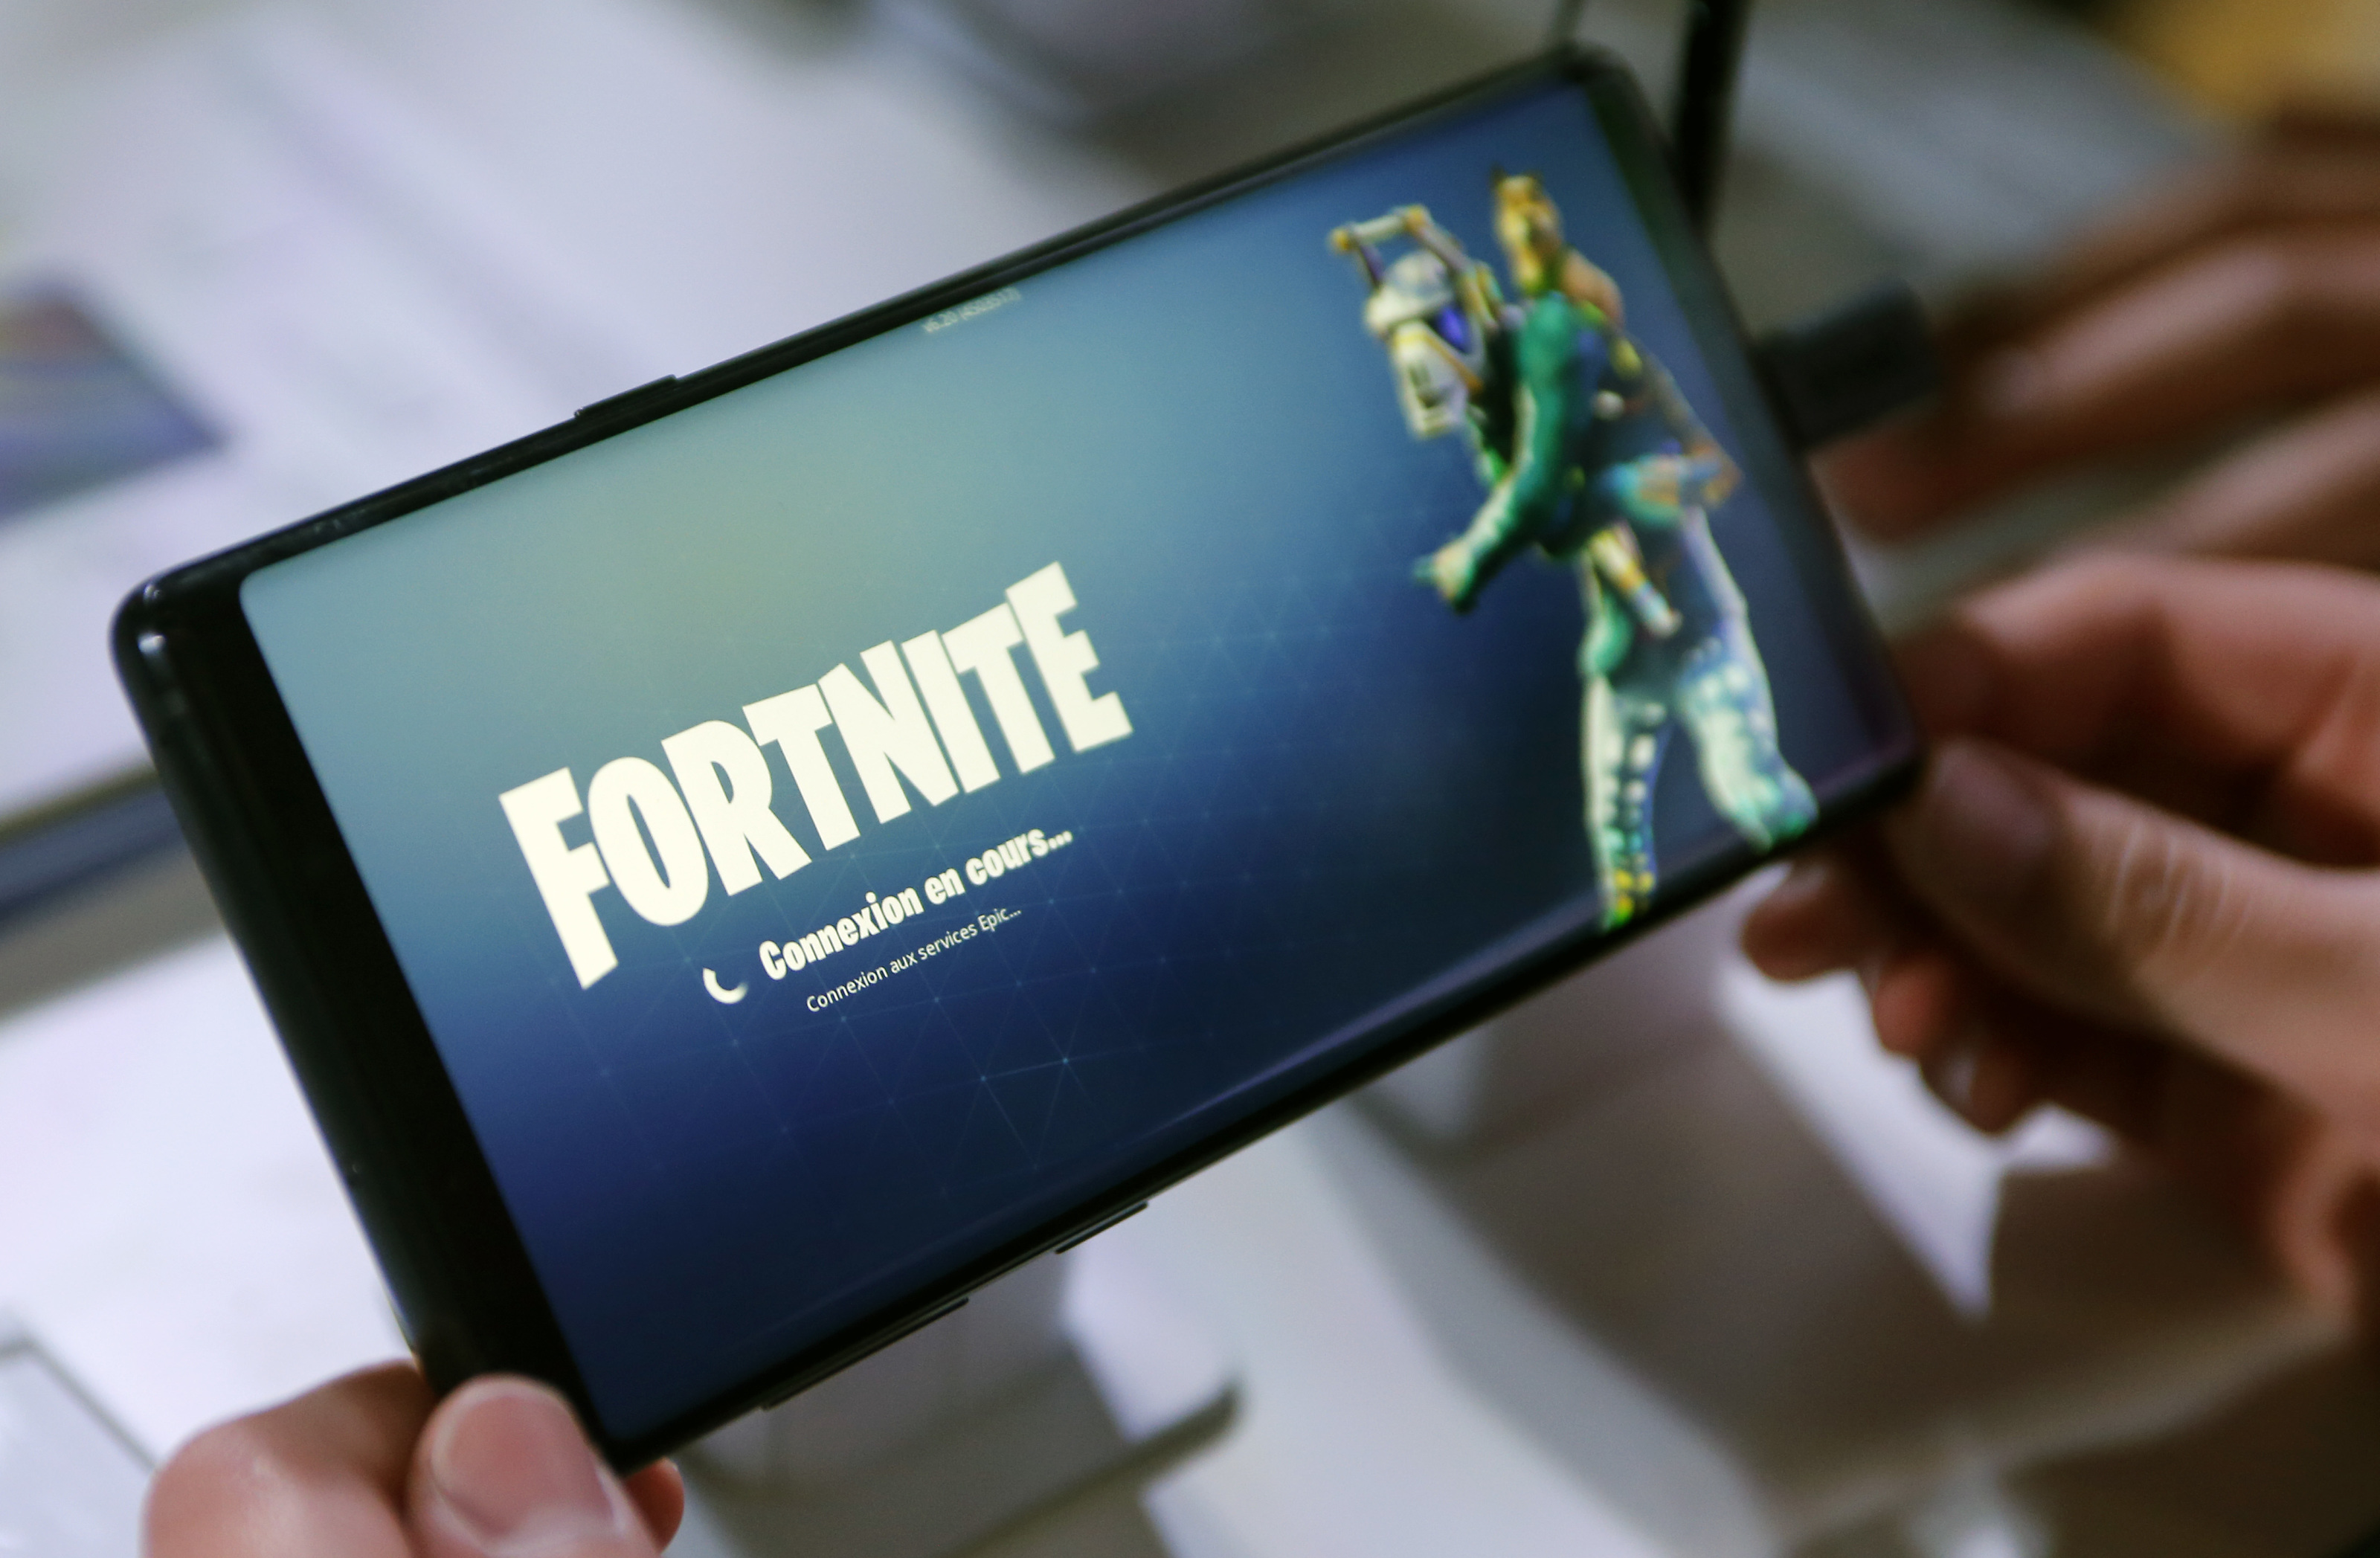 How to download and play Fortnite on Android without Google Play